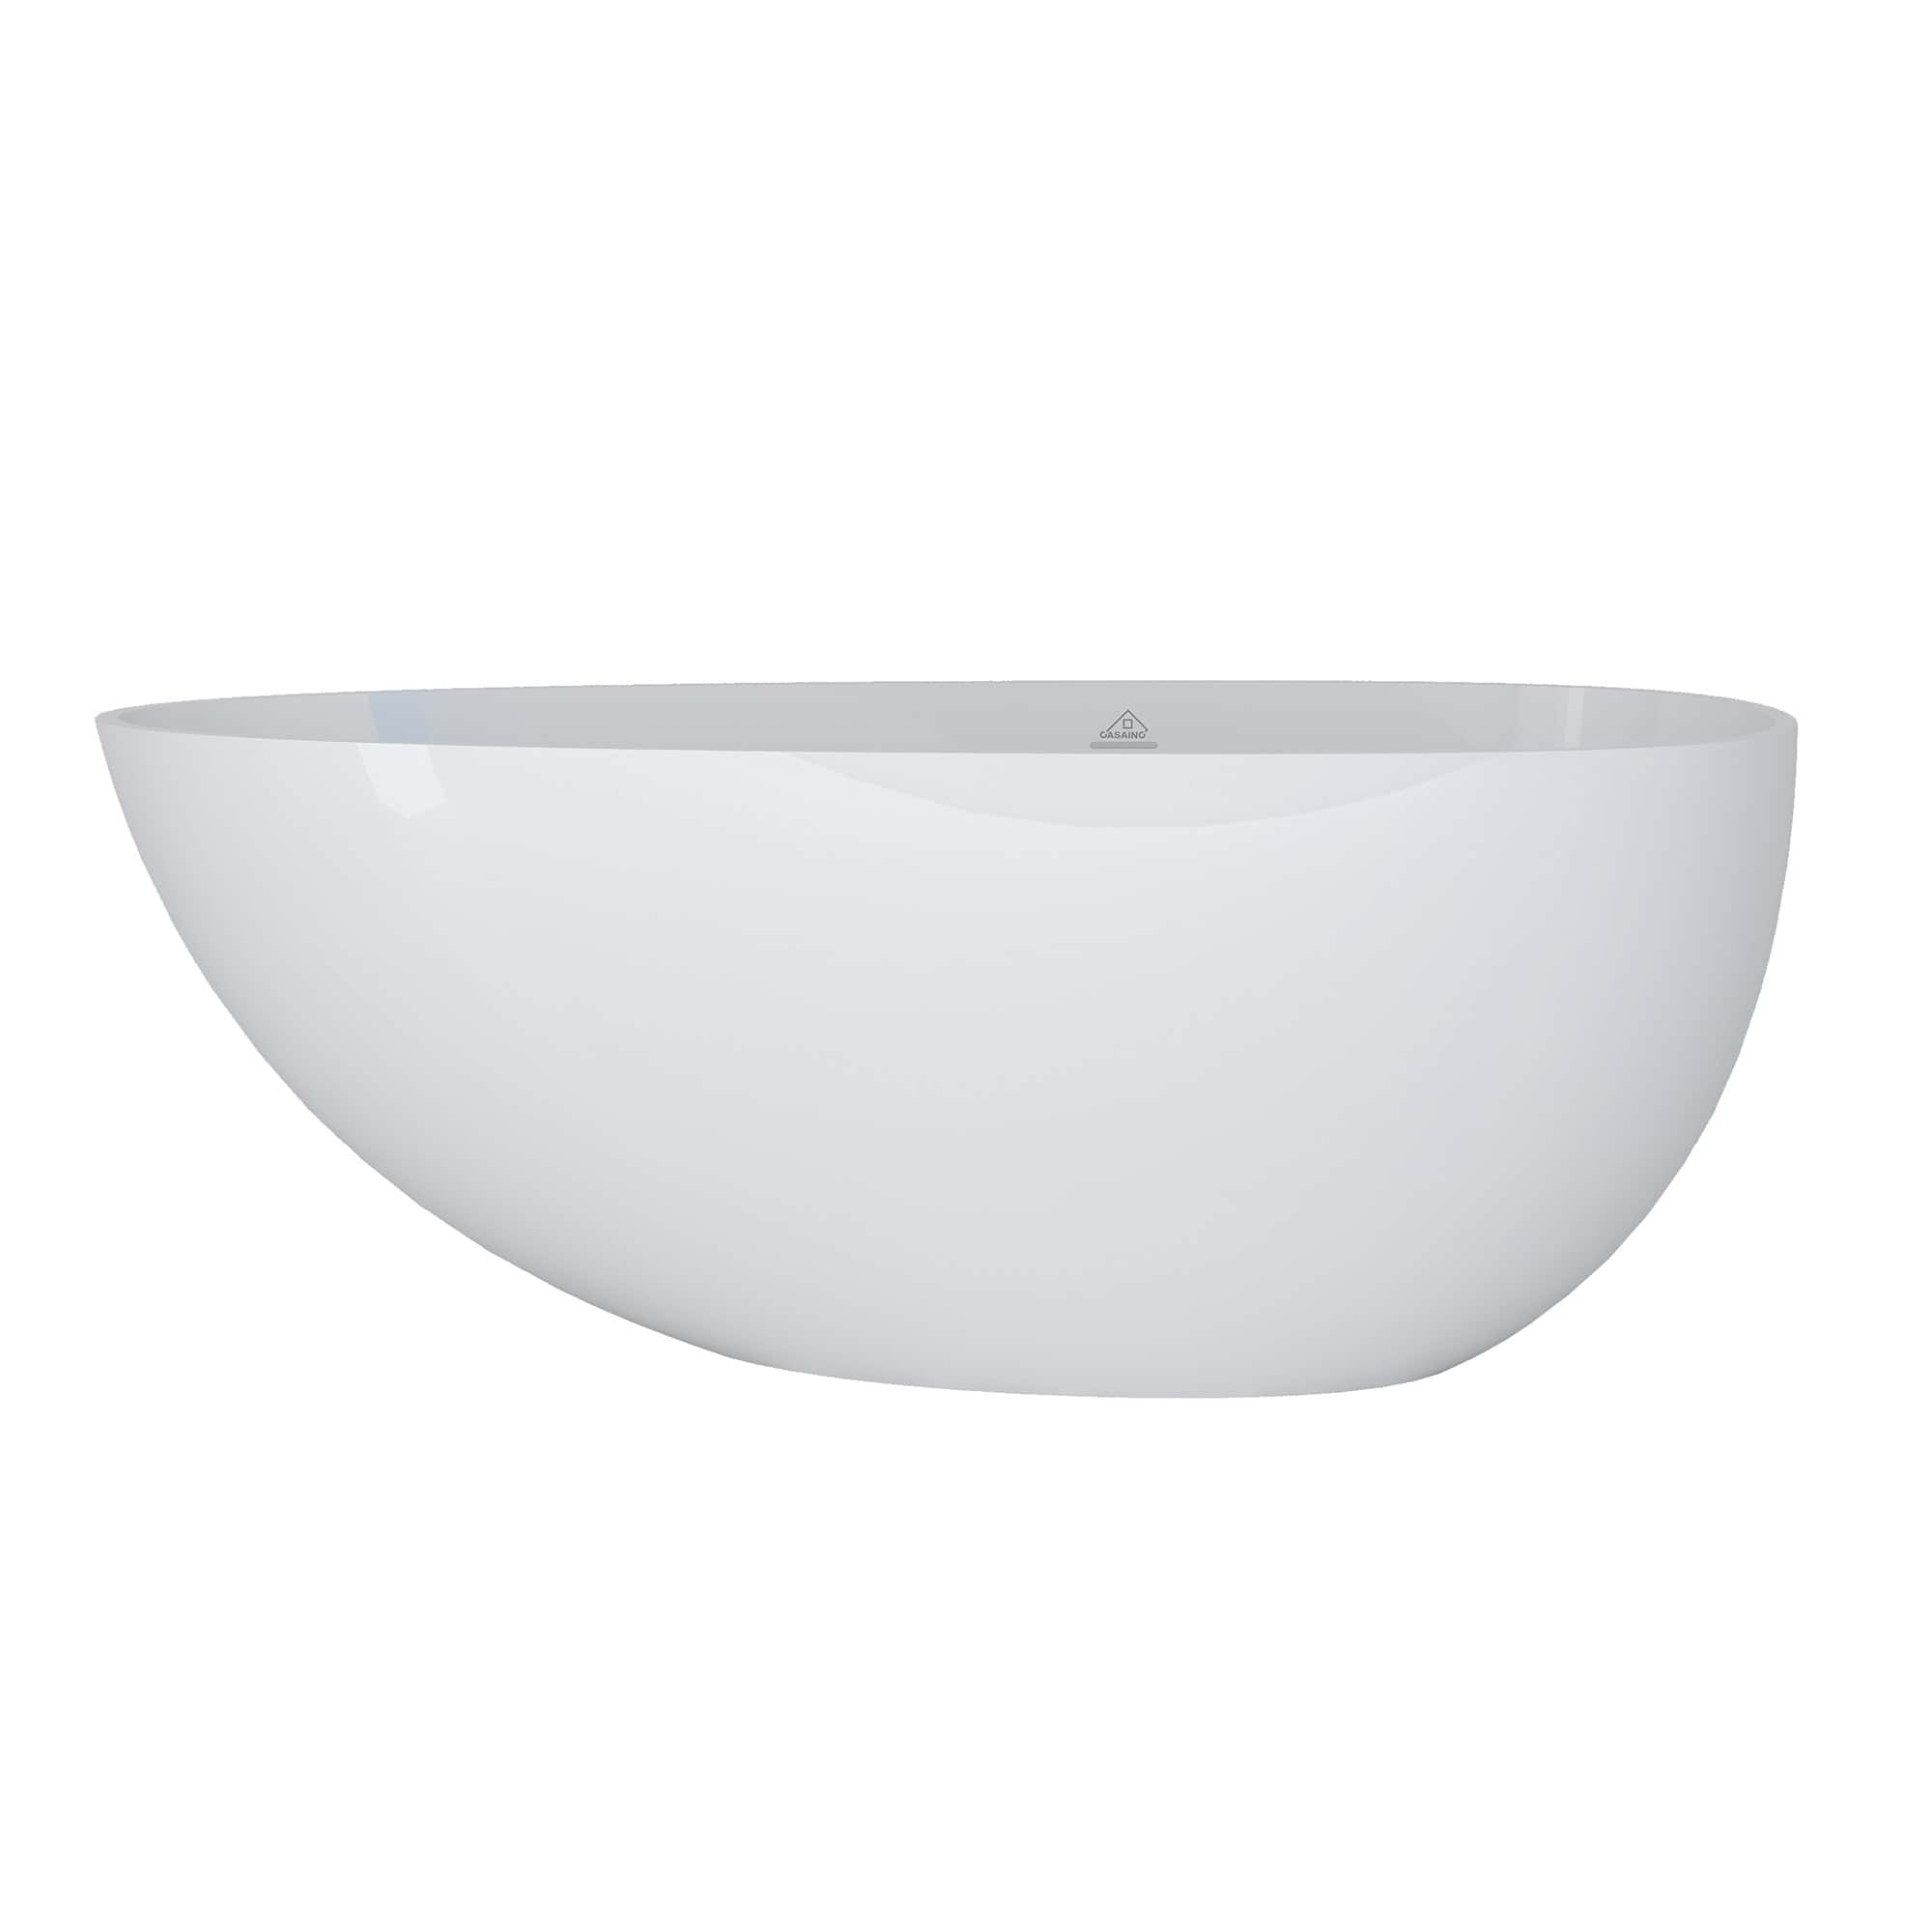 CASAINC 59 Inch Glossy White Freestanding Solid Surface Egg Shaped Soa